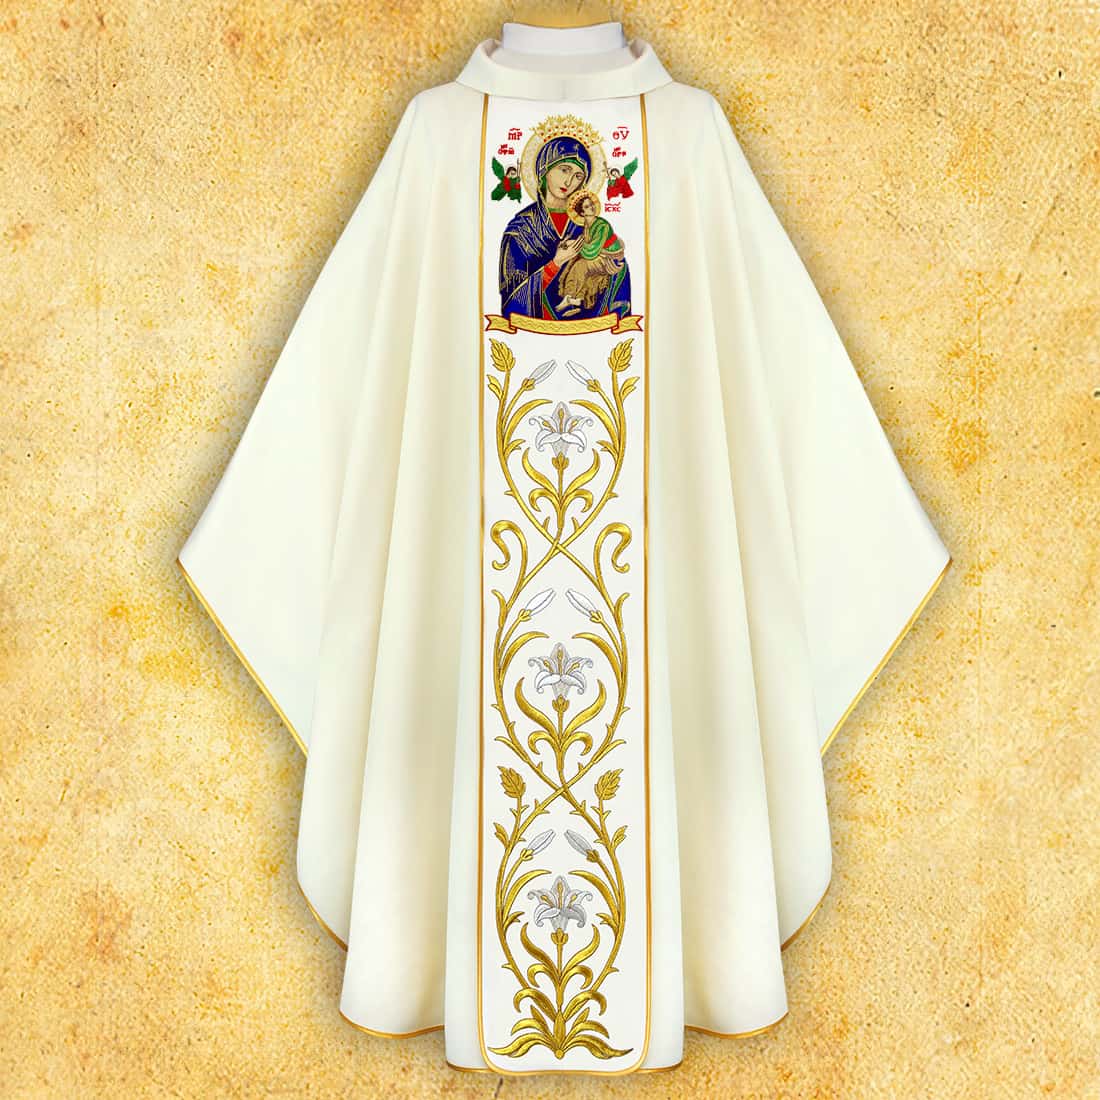 Chasuble with embroidered image of "Our Lady of Perpetual Help"